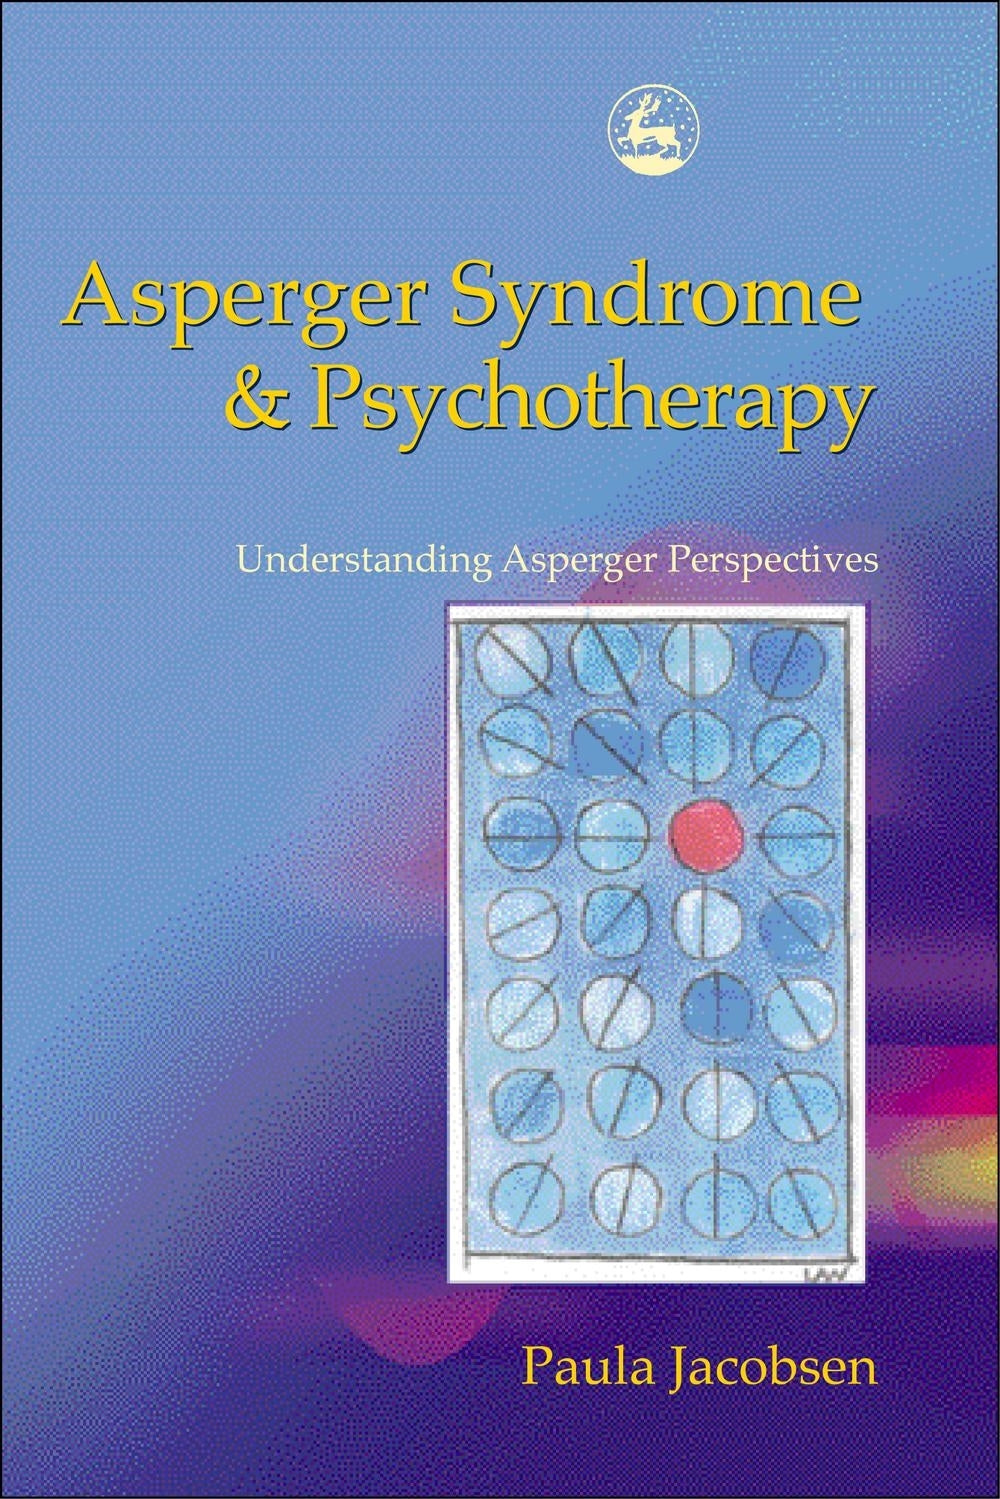 Asperger Syndrome and Psychotherapy by Paula Jacobsen